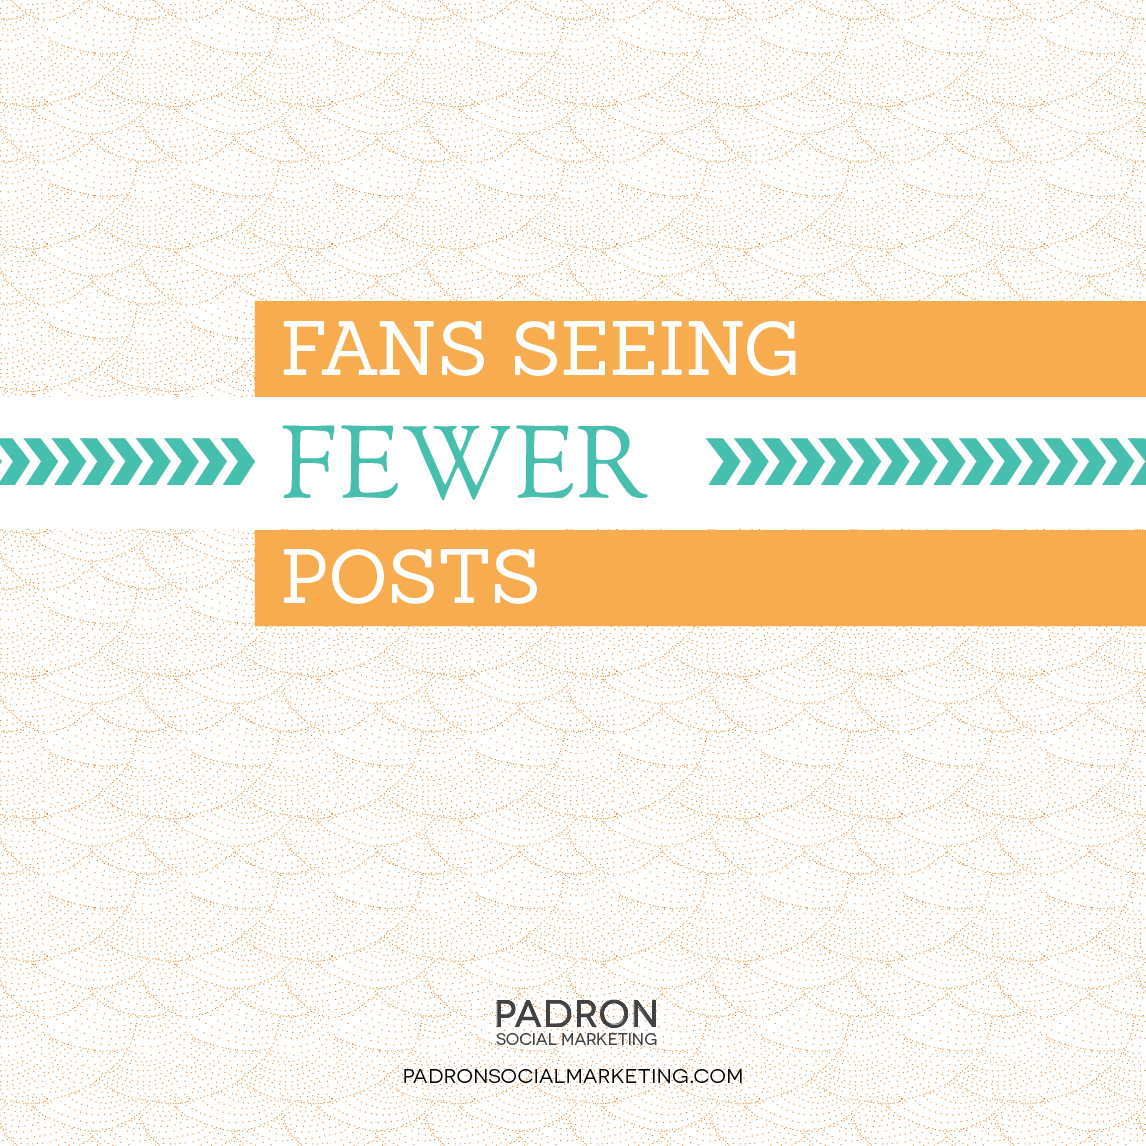 Fans Seeing Fewer Posts